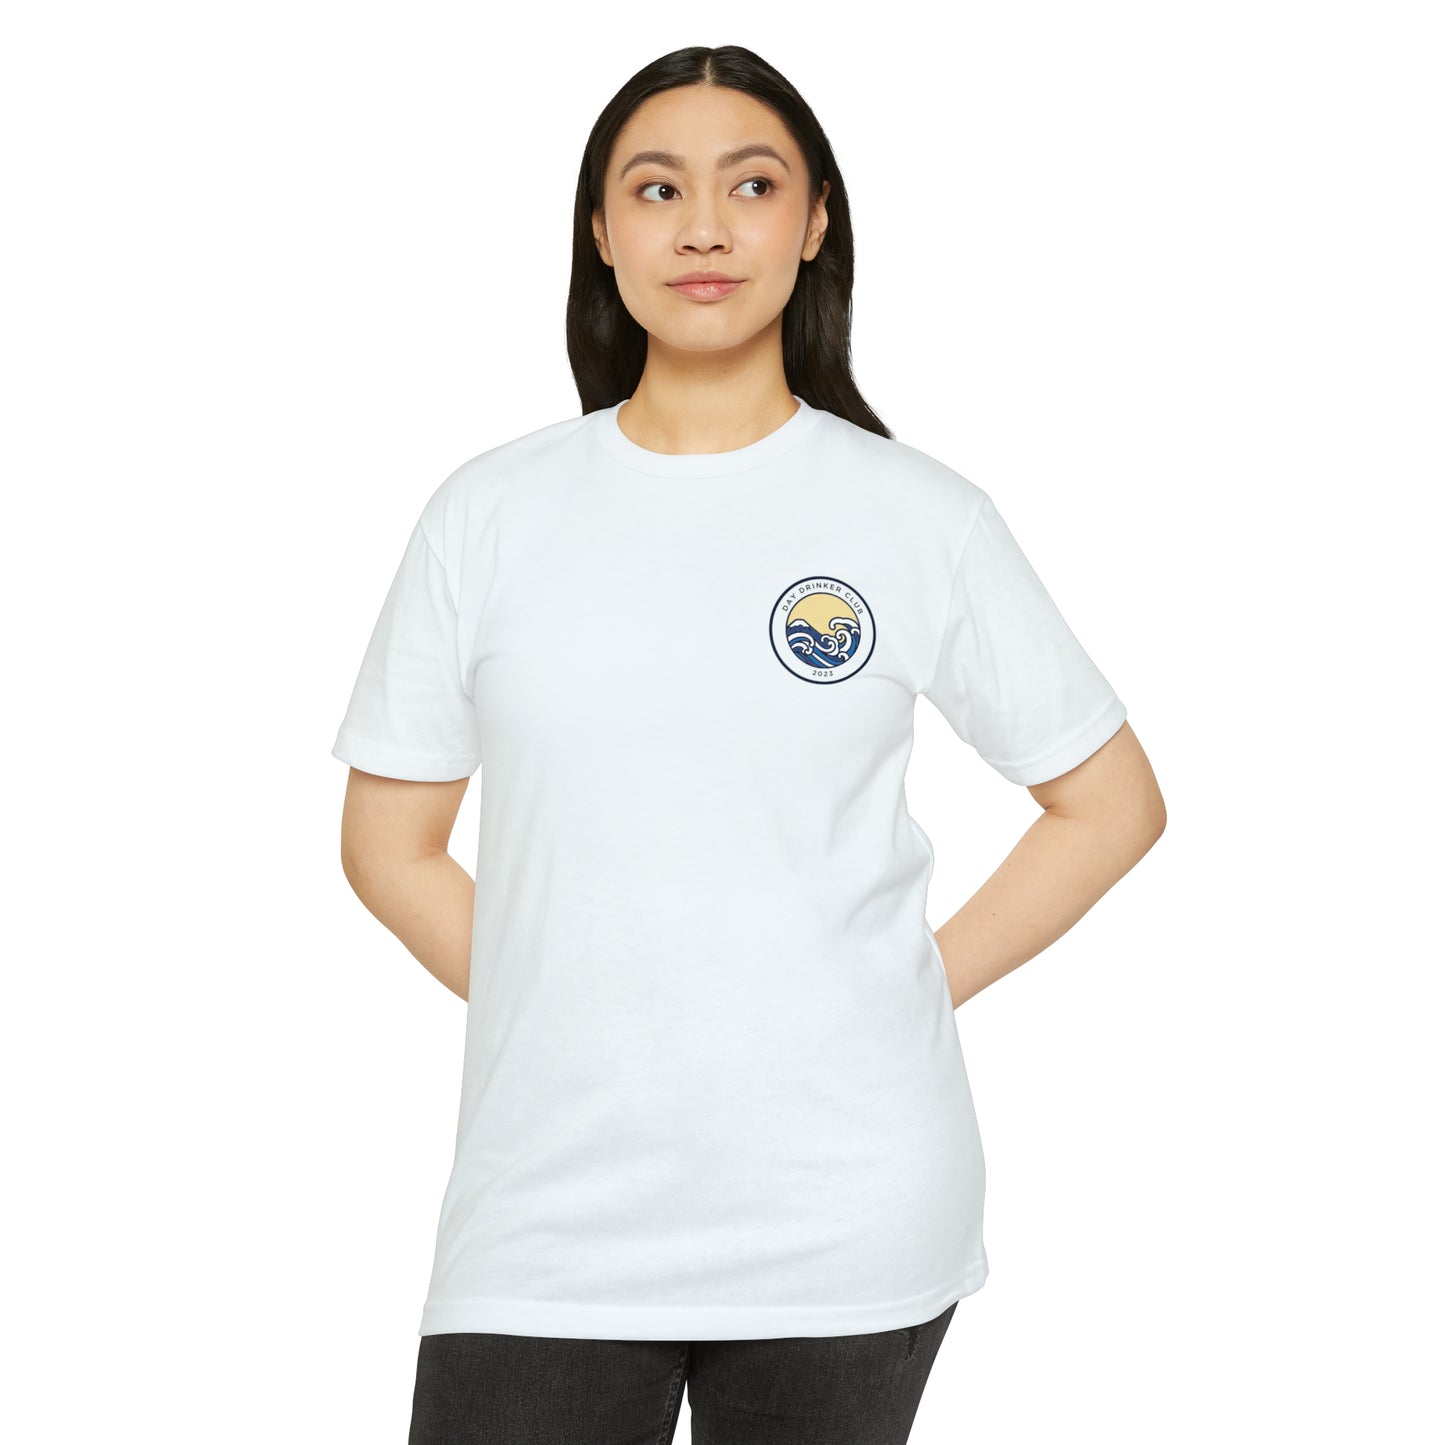 Unisex CVC Jersey T-shirt - Day Drinking Club: The Official T-Shirt of People Who Are Too Lazy to Wait for Happy Hour